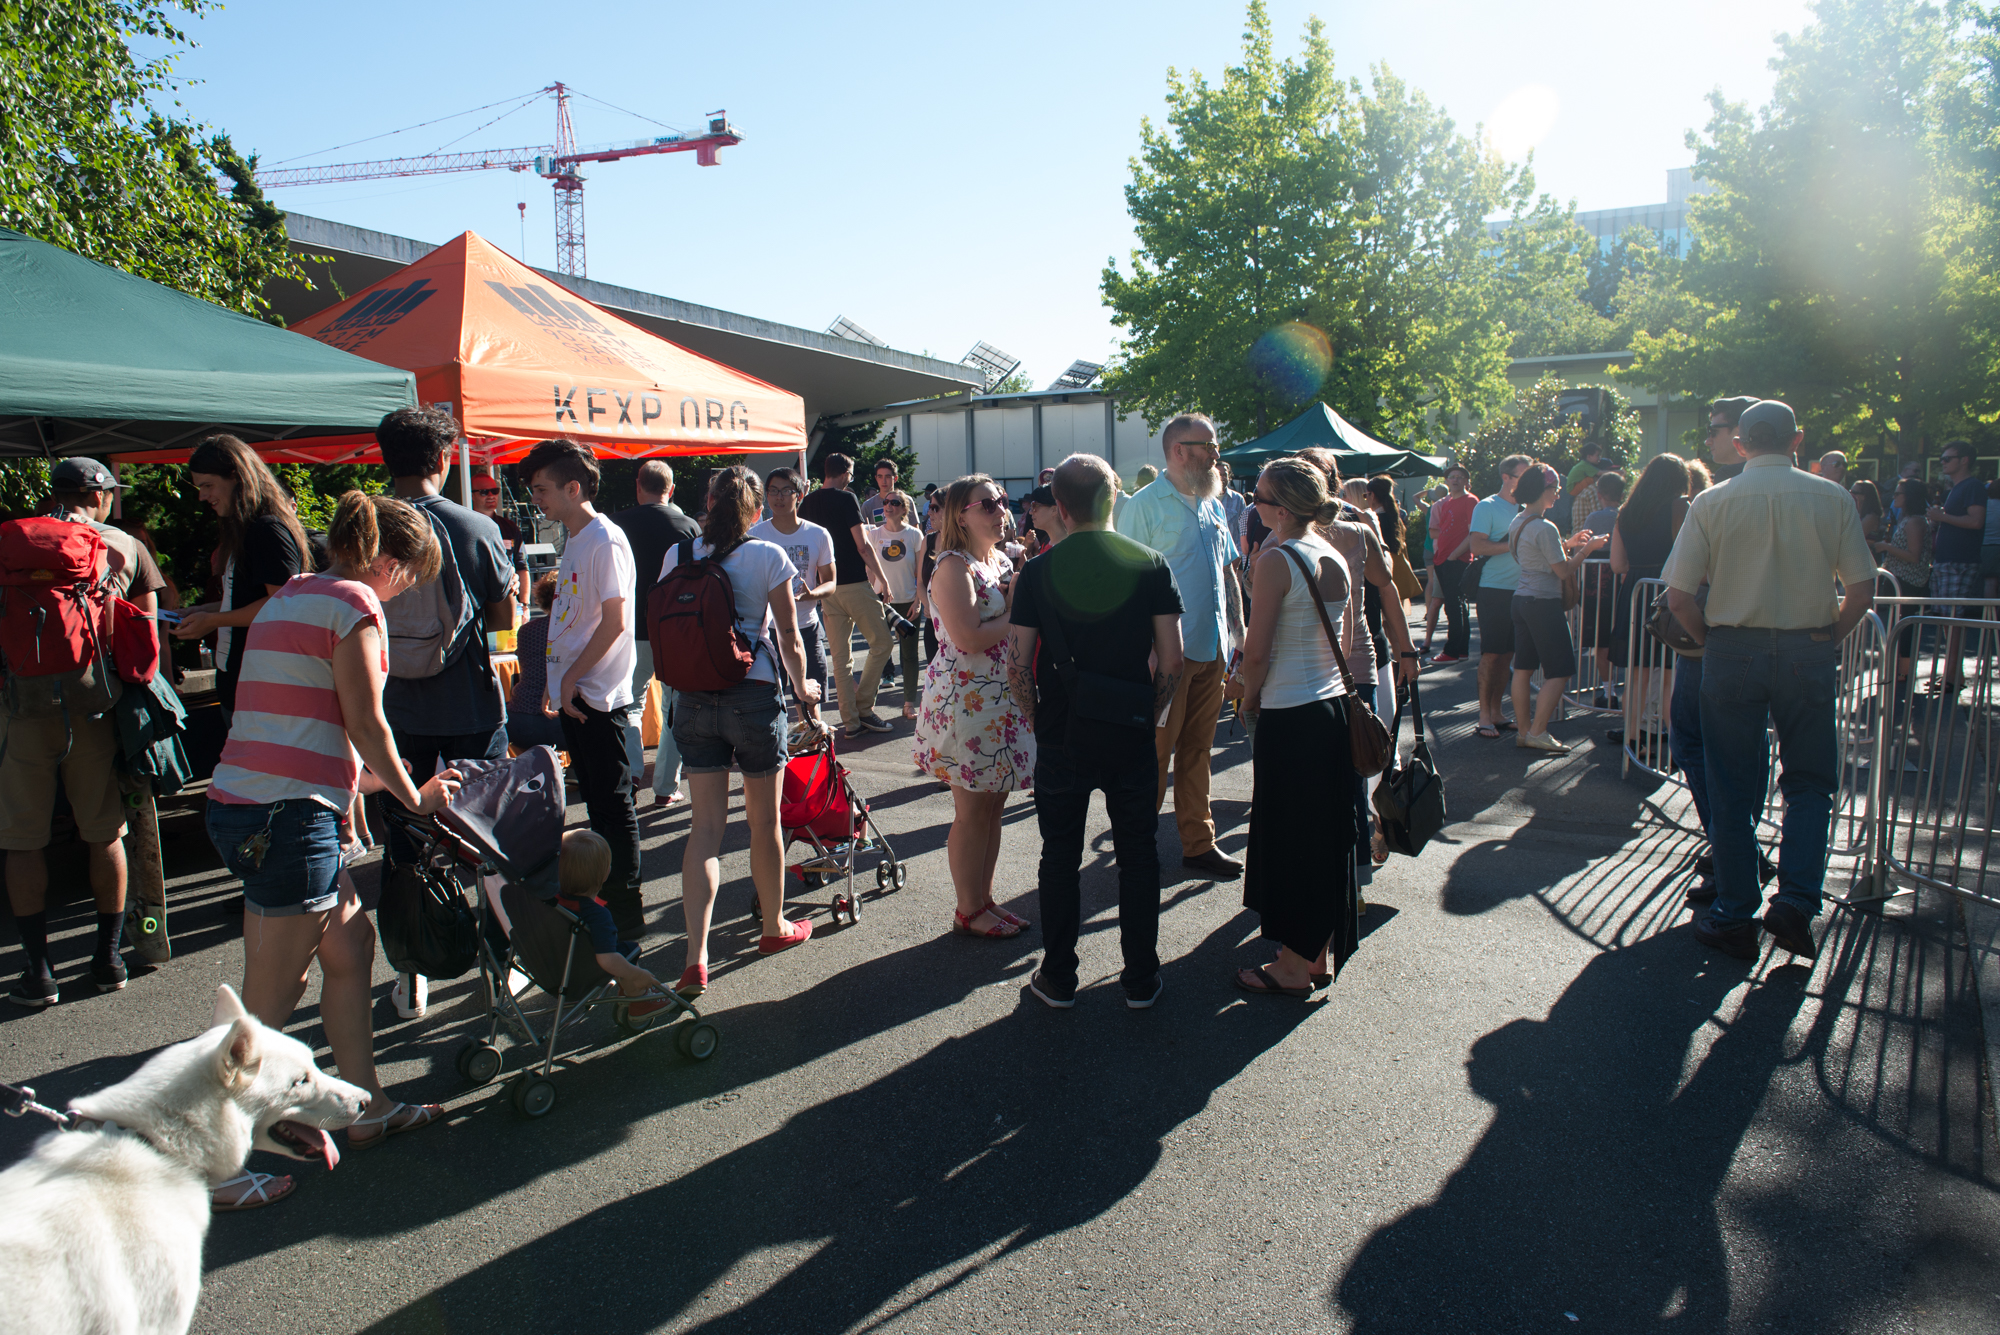 KEXP set up an outdoor event to welcome everyone to their new home